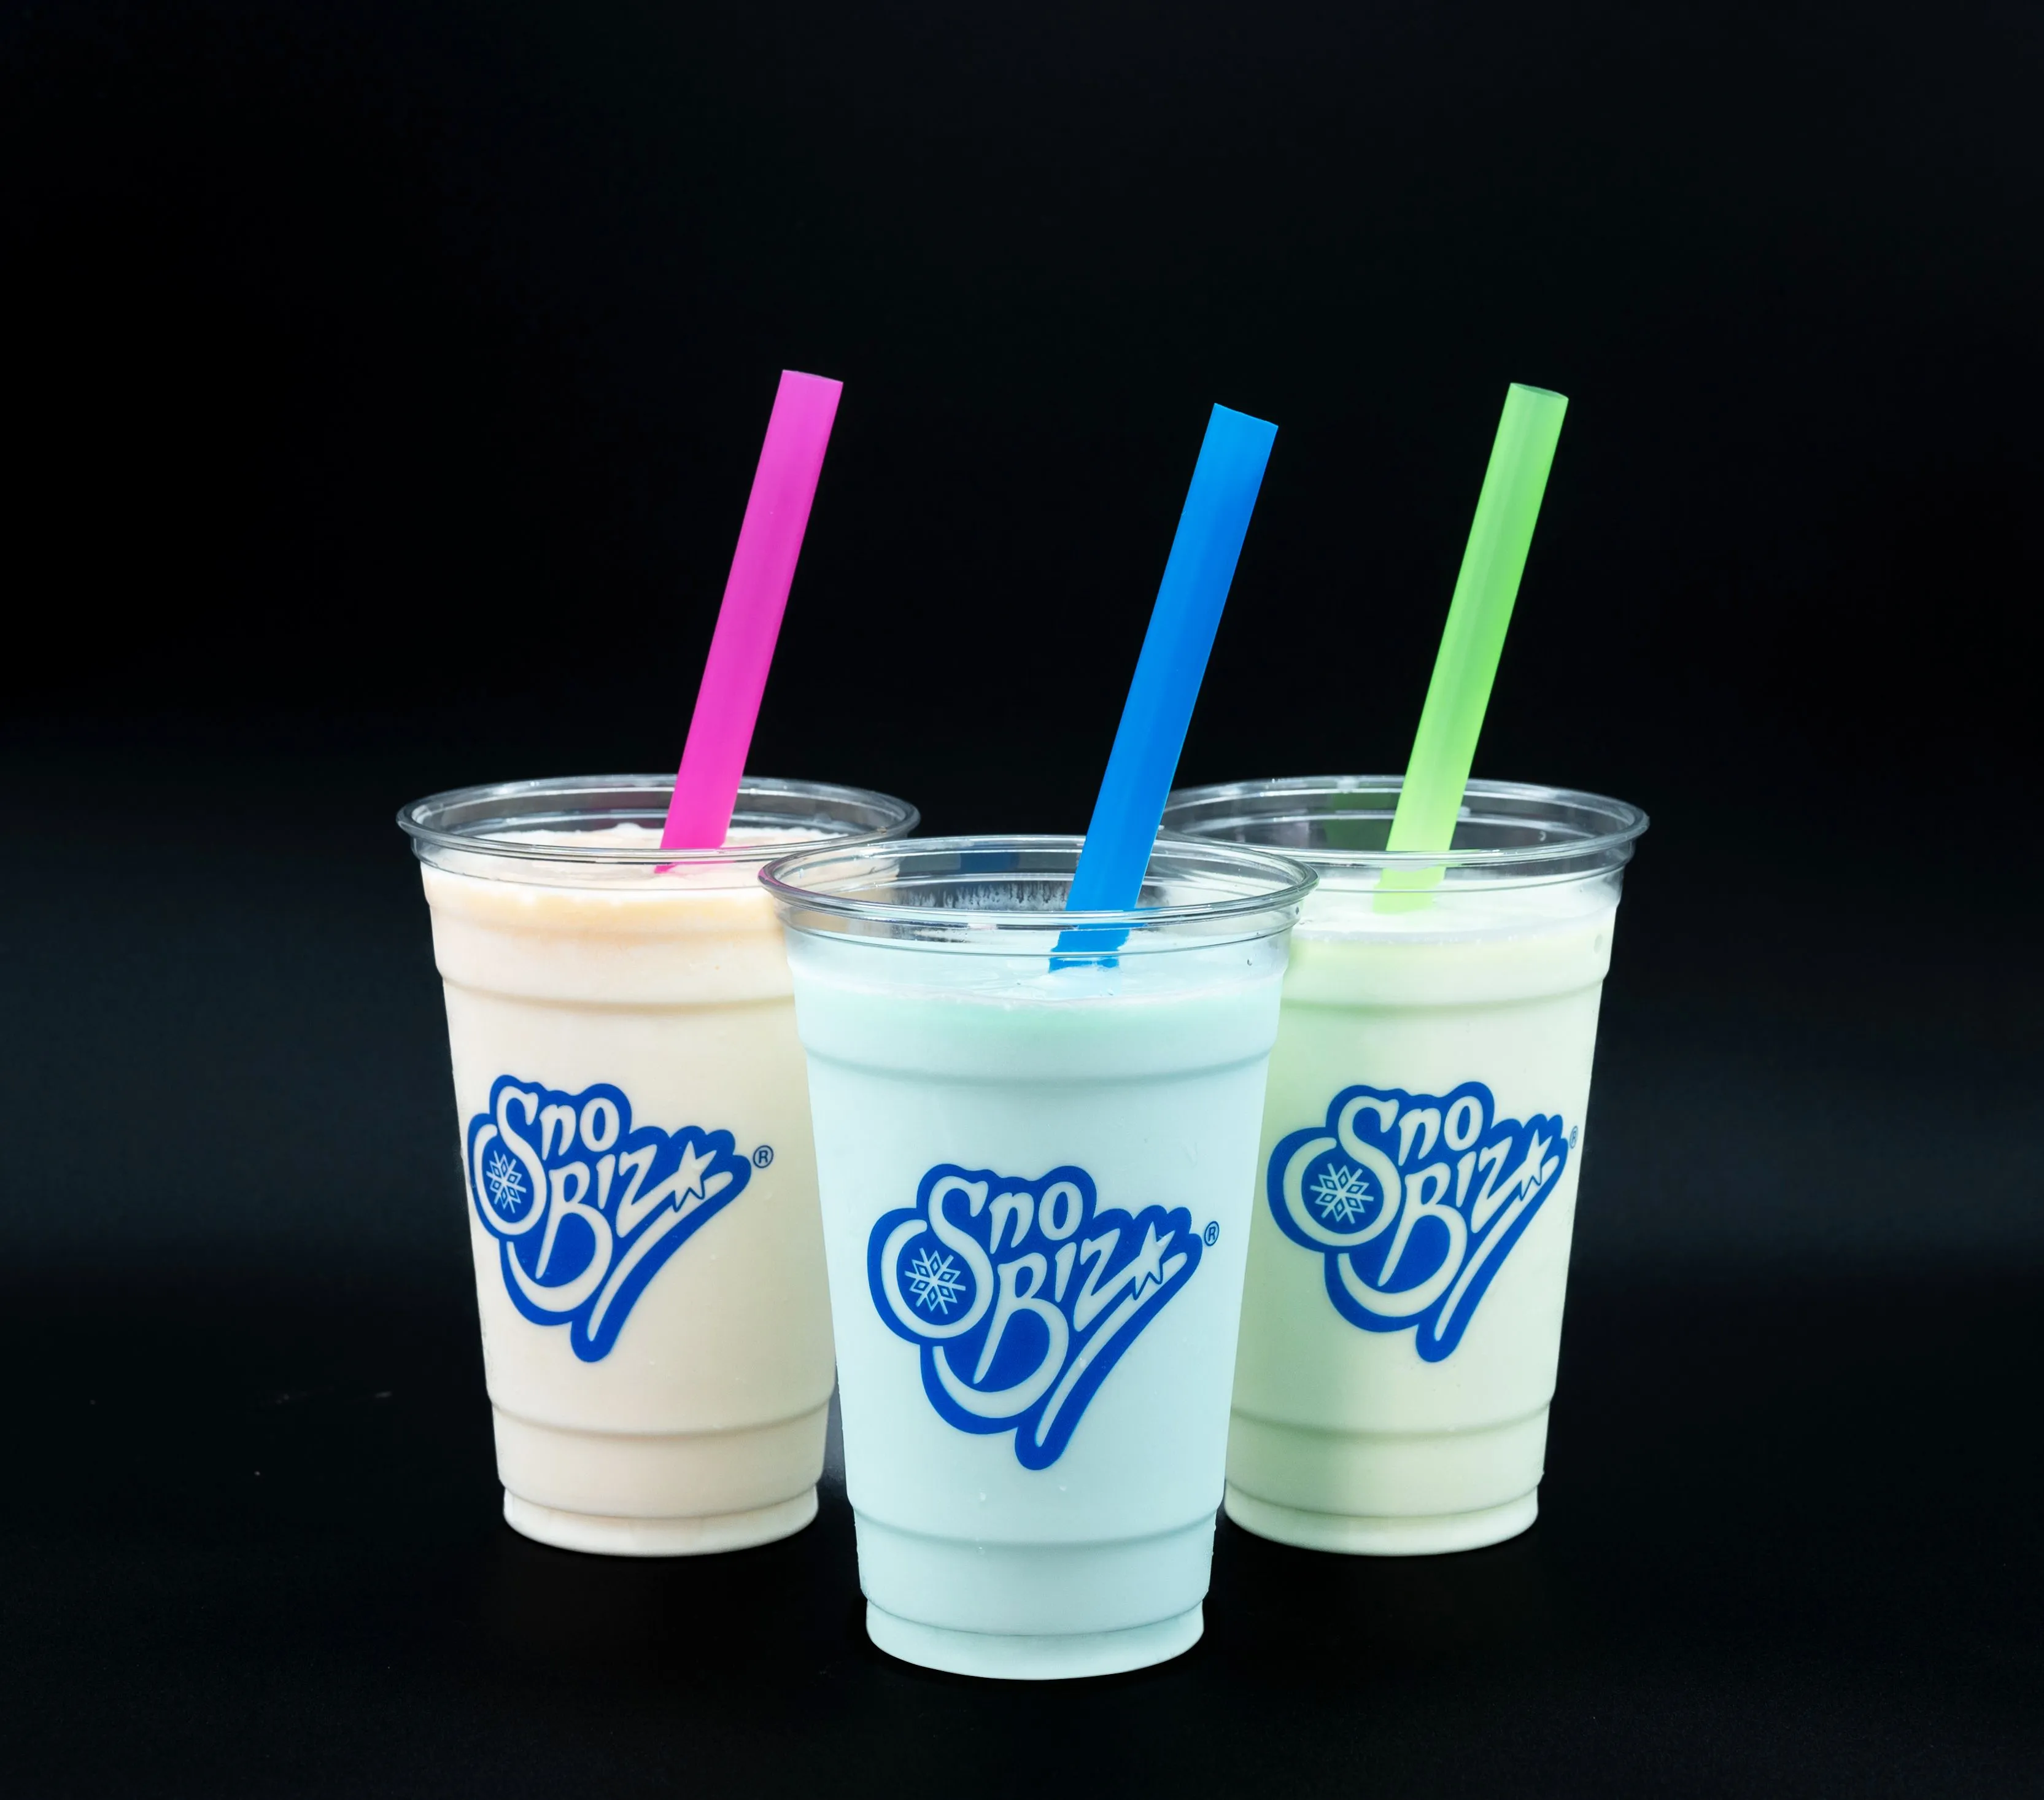 Three Sno Biz branded frozen drinks with pink, blue, and green straws against a black background.